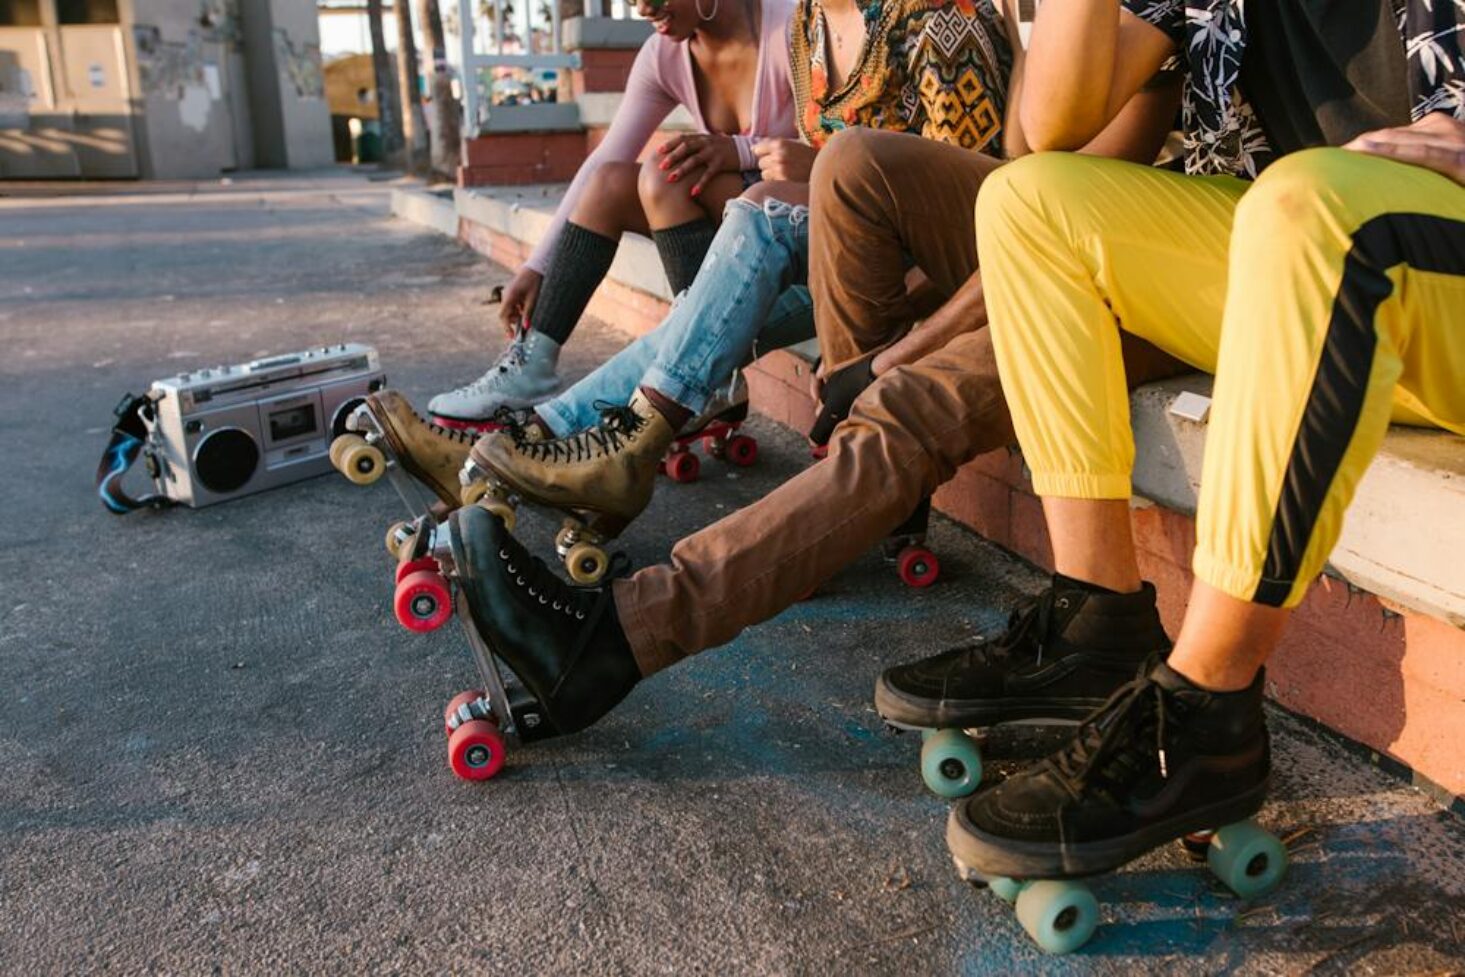 The Most Exciting Roller Skating Spots in Brighton